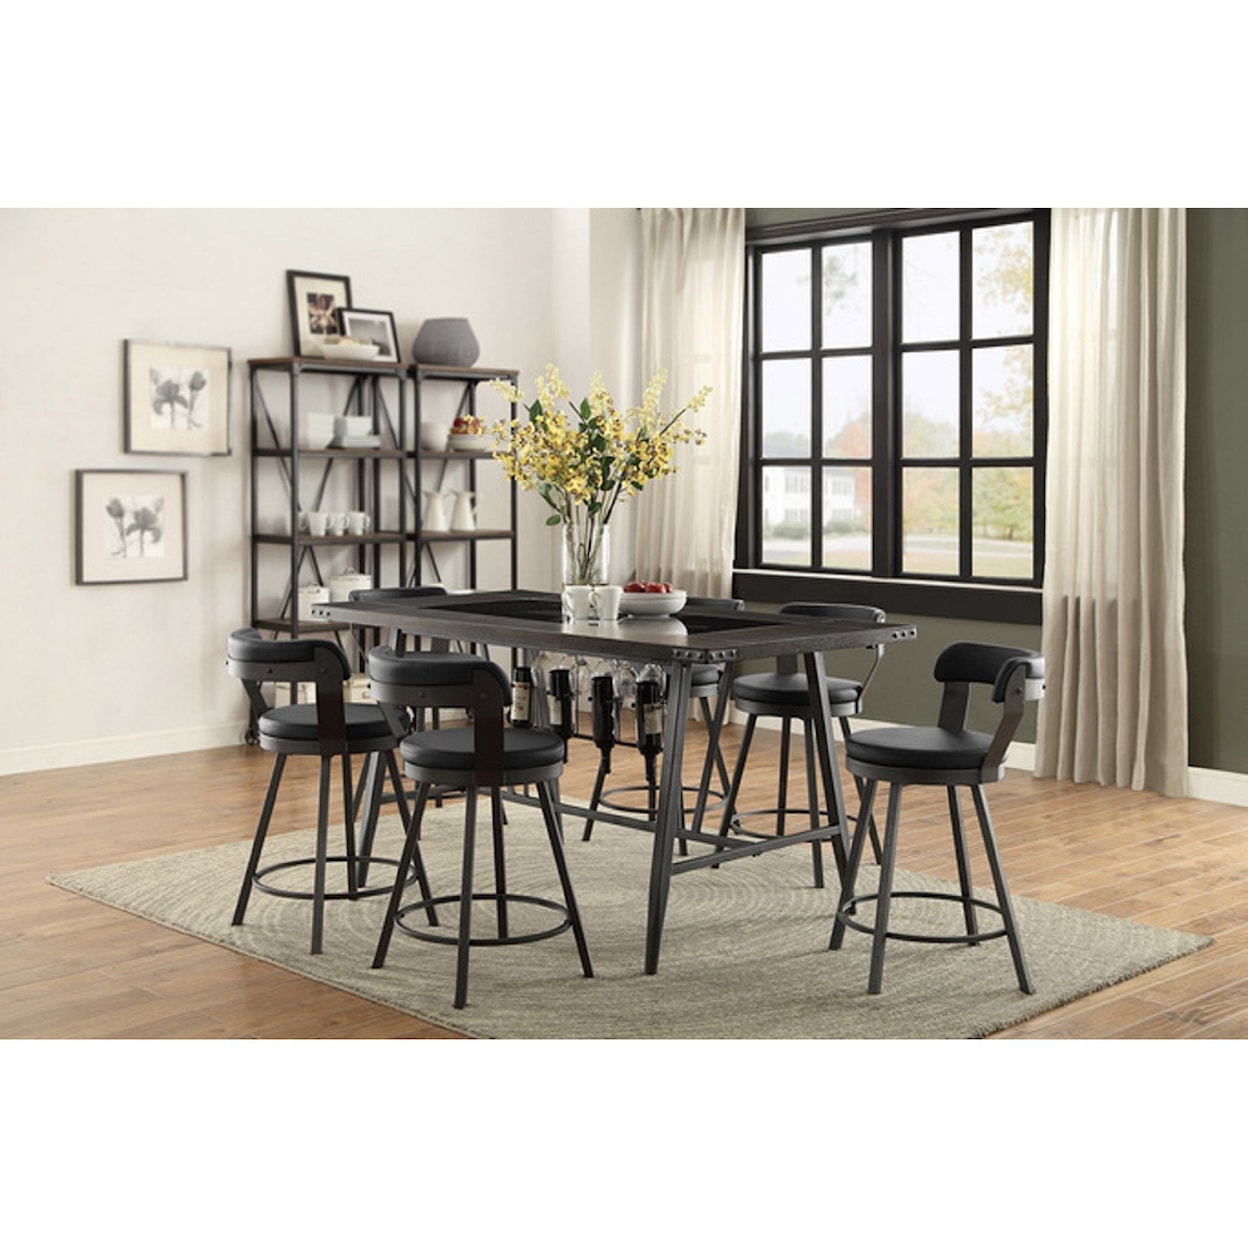 Homelegance 5566 Counter Height Table